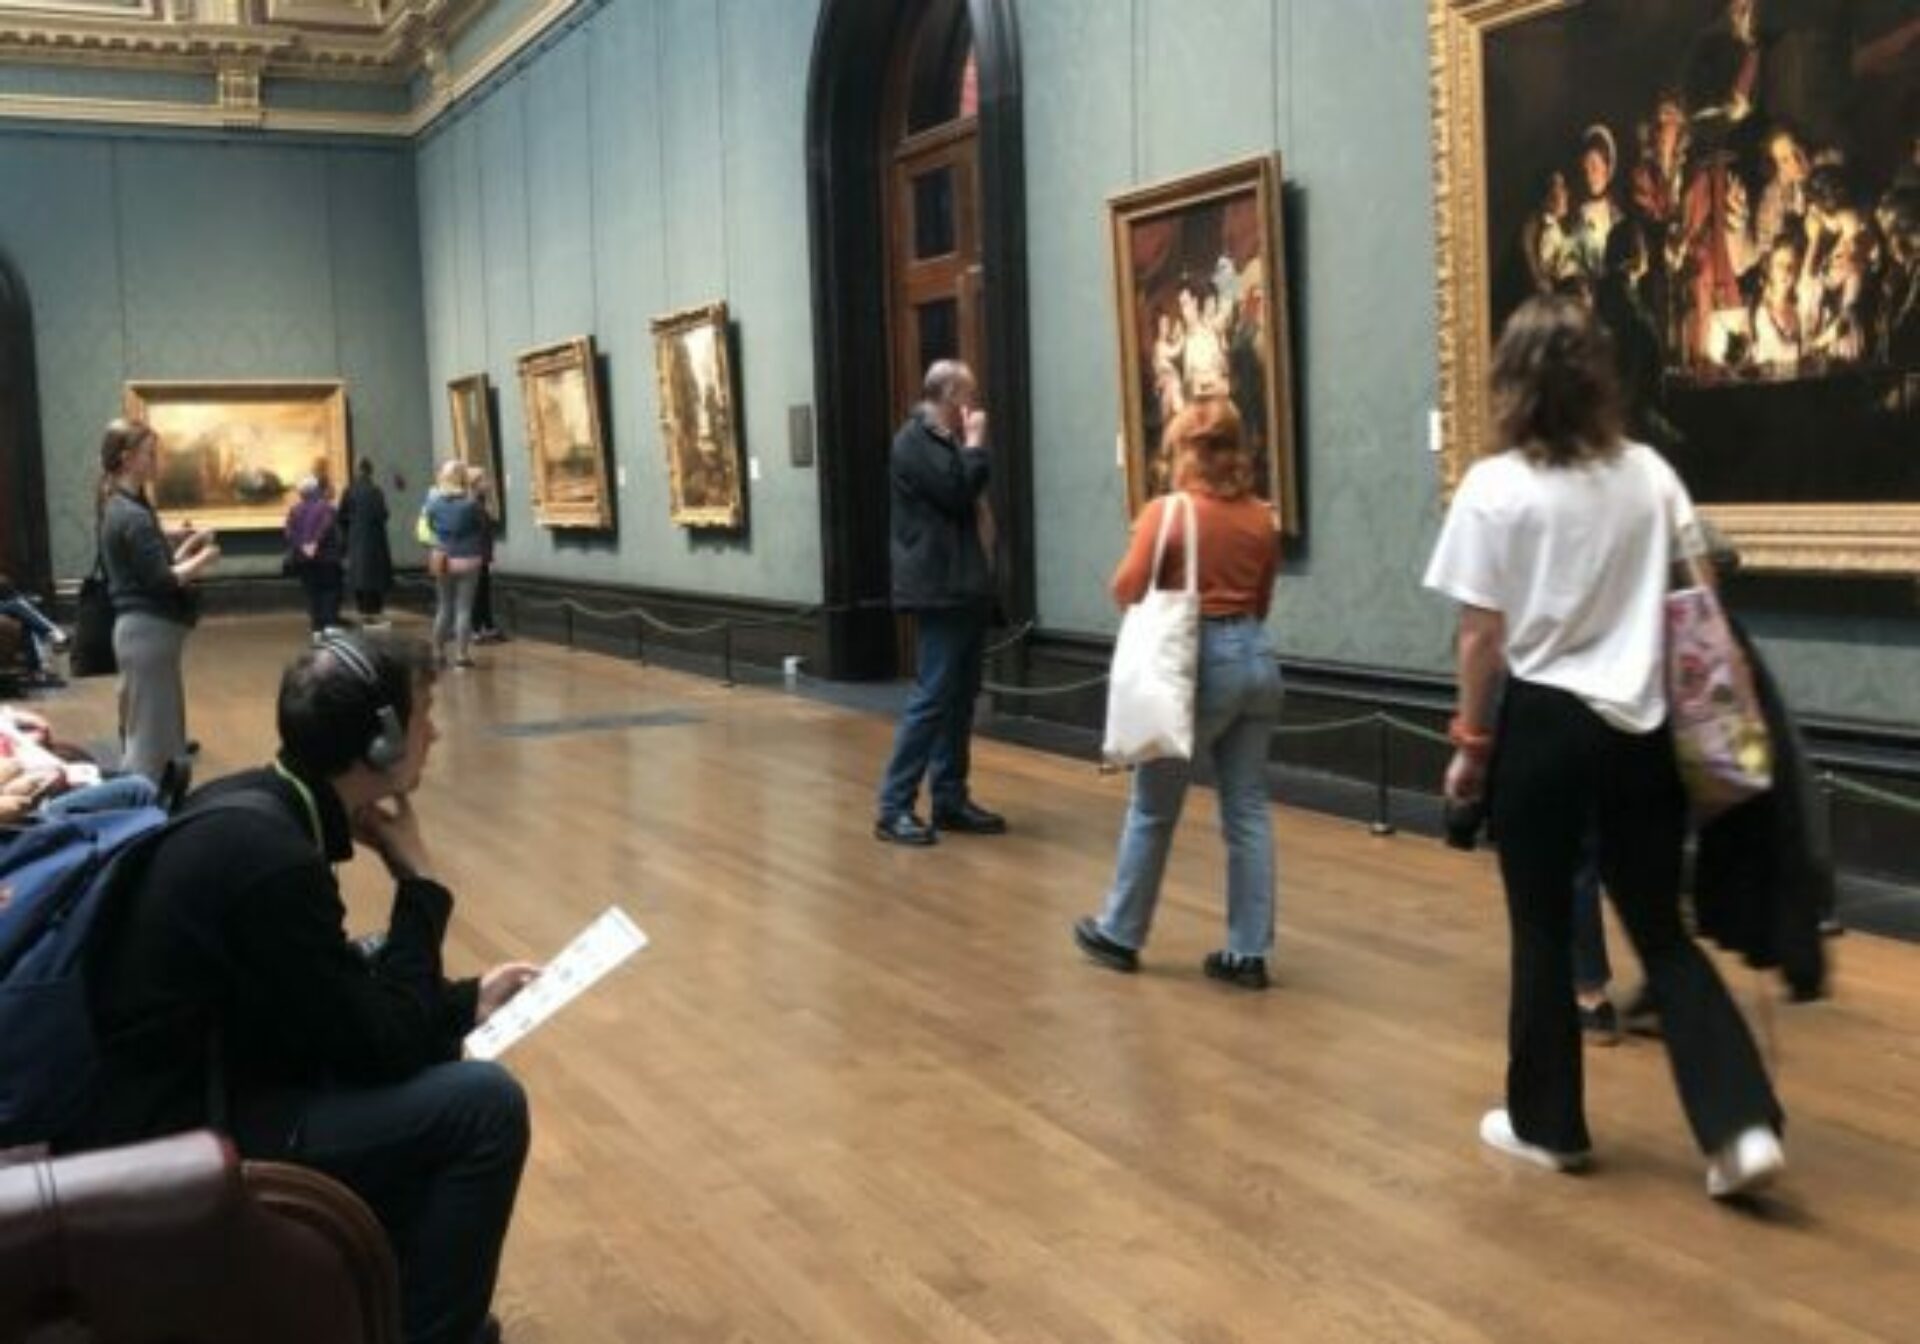 Myth-busting through art: Designing a mental health audio tour for the National Gallery